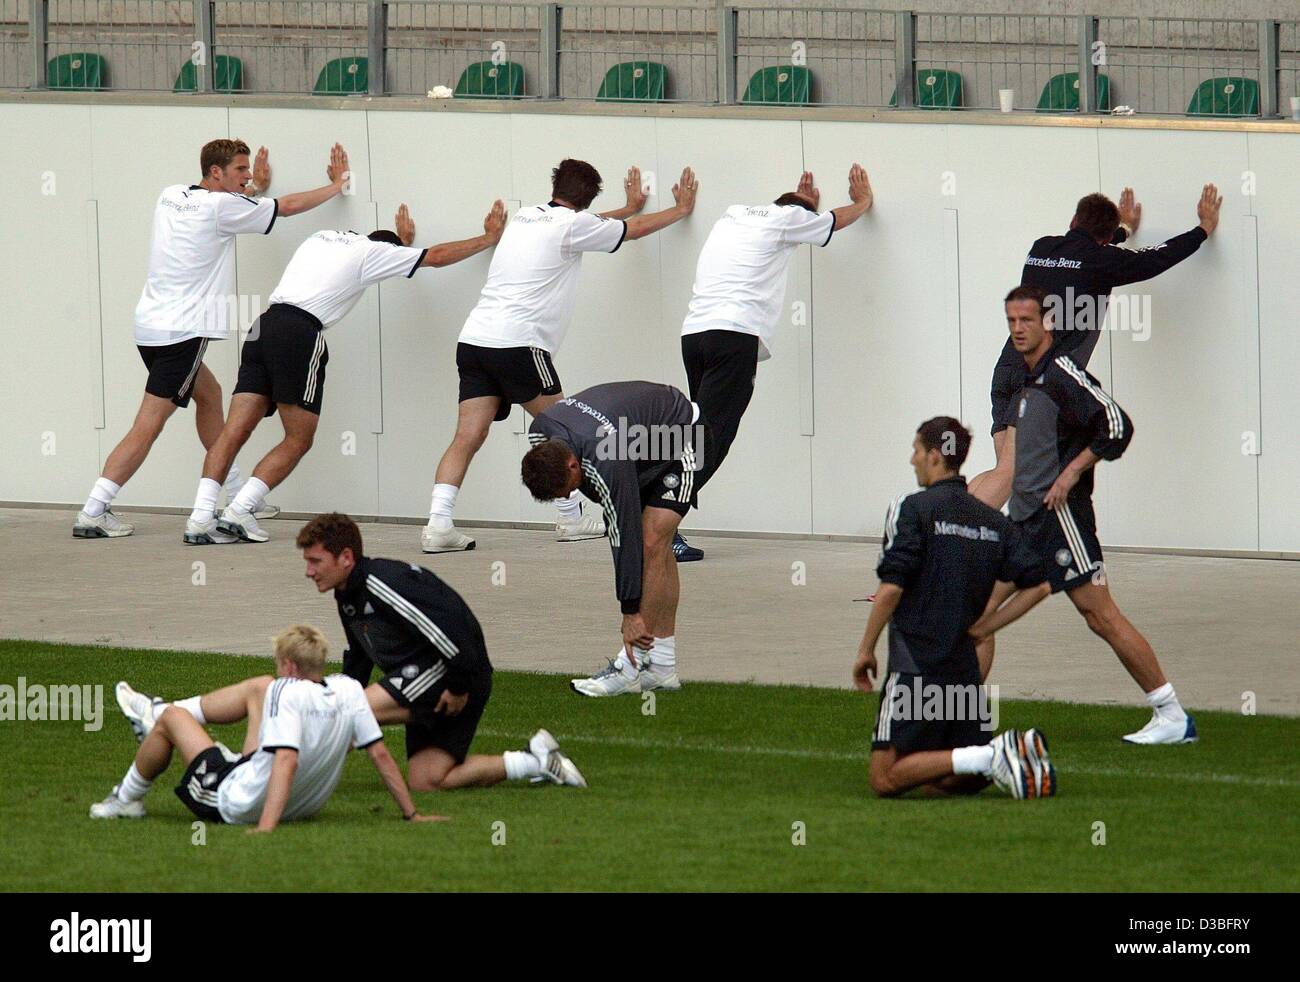 (dpa) - Players of the German national soccer team conduct stretching exercises during a training session in the Volkswagen Arena in Wolfsburg, Germany, 2 June 2003. The training session is part of the selection process for the German national soccer team which continues after Germany successfully p Stock Photo